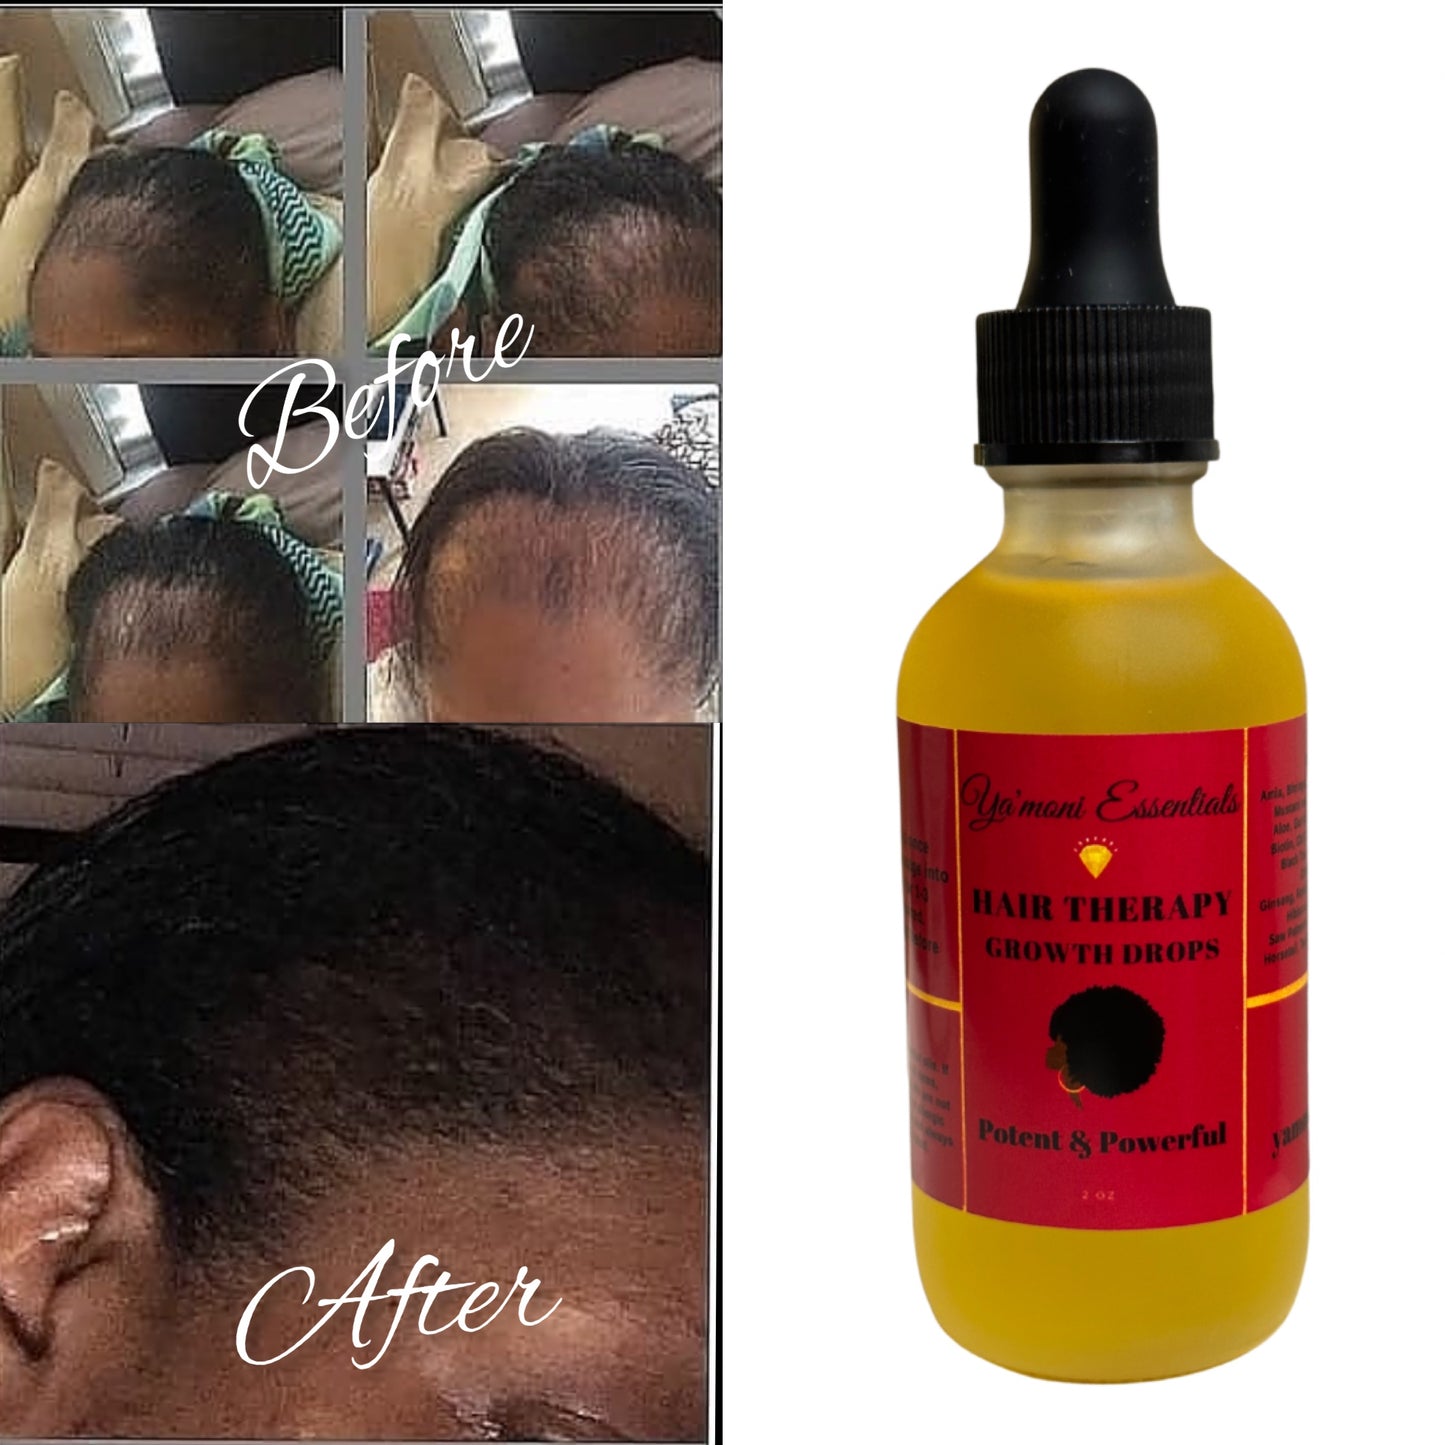 Hair Therapy Growth Drops 2oz